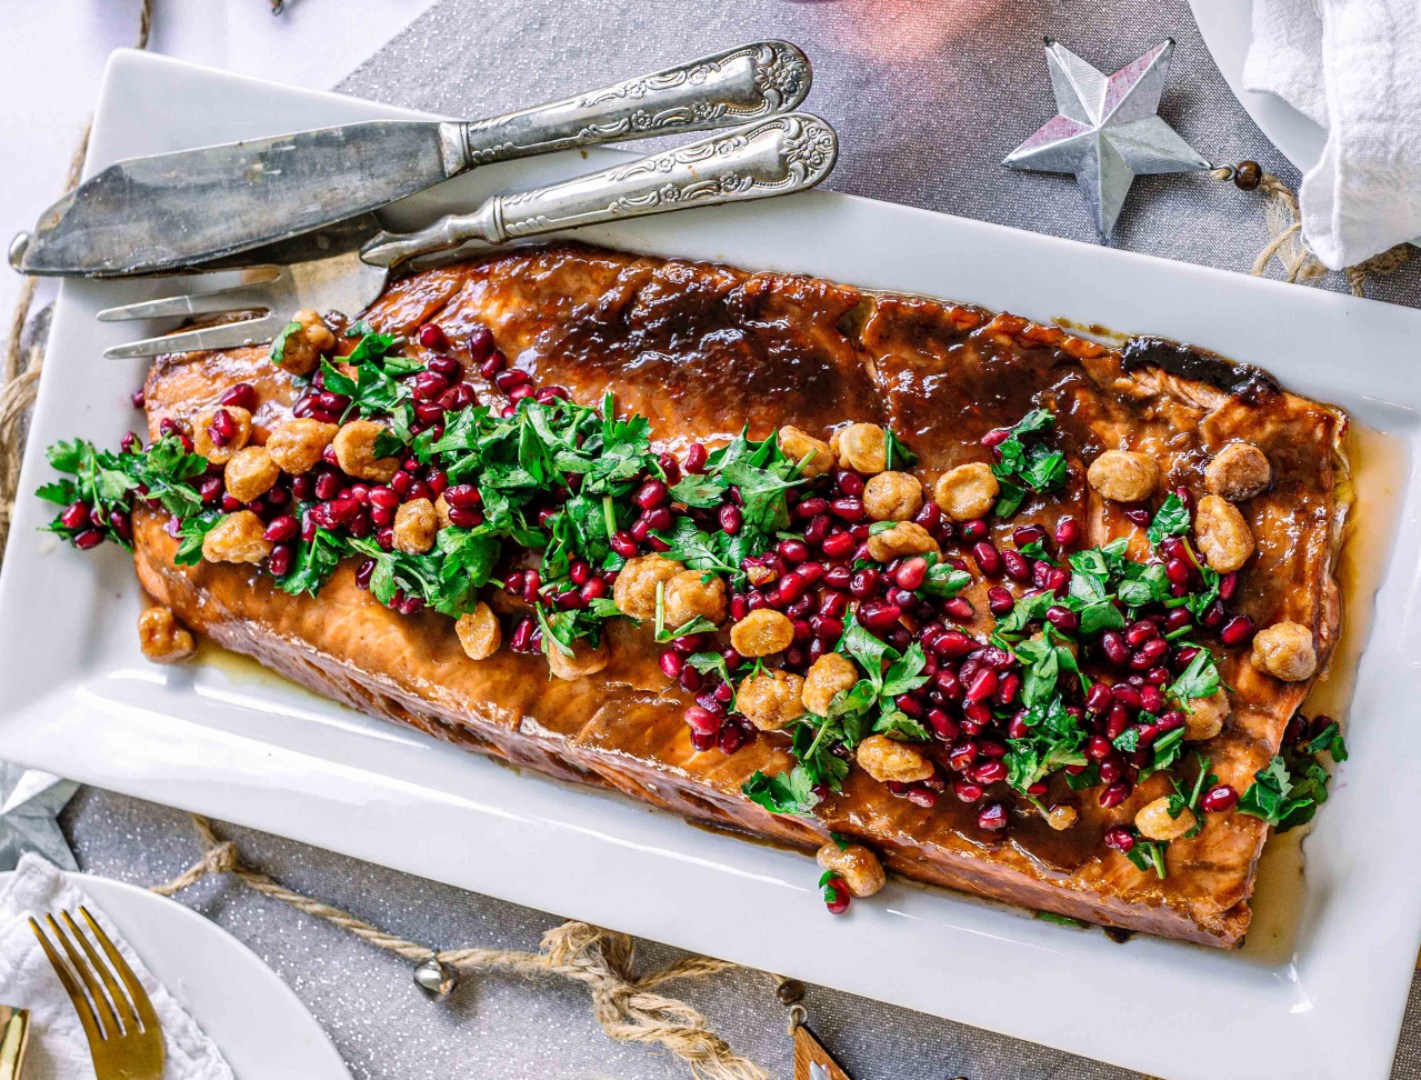 A whole side of baked salmon topped with pomegranate seeds and honeyed macadamia nuts